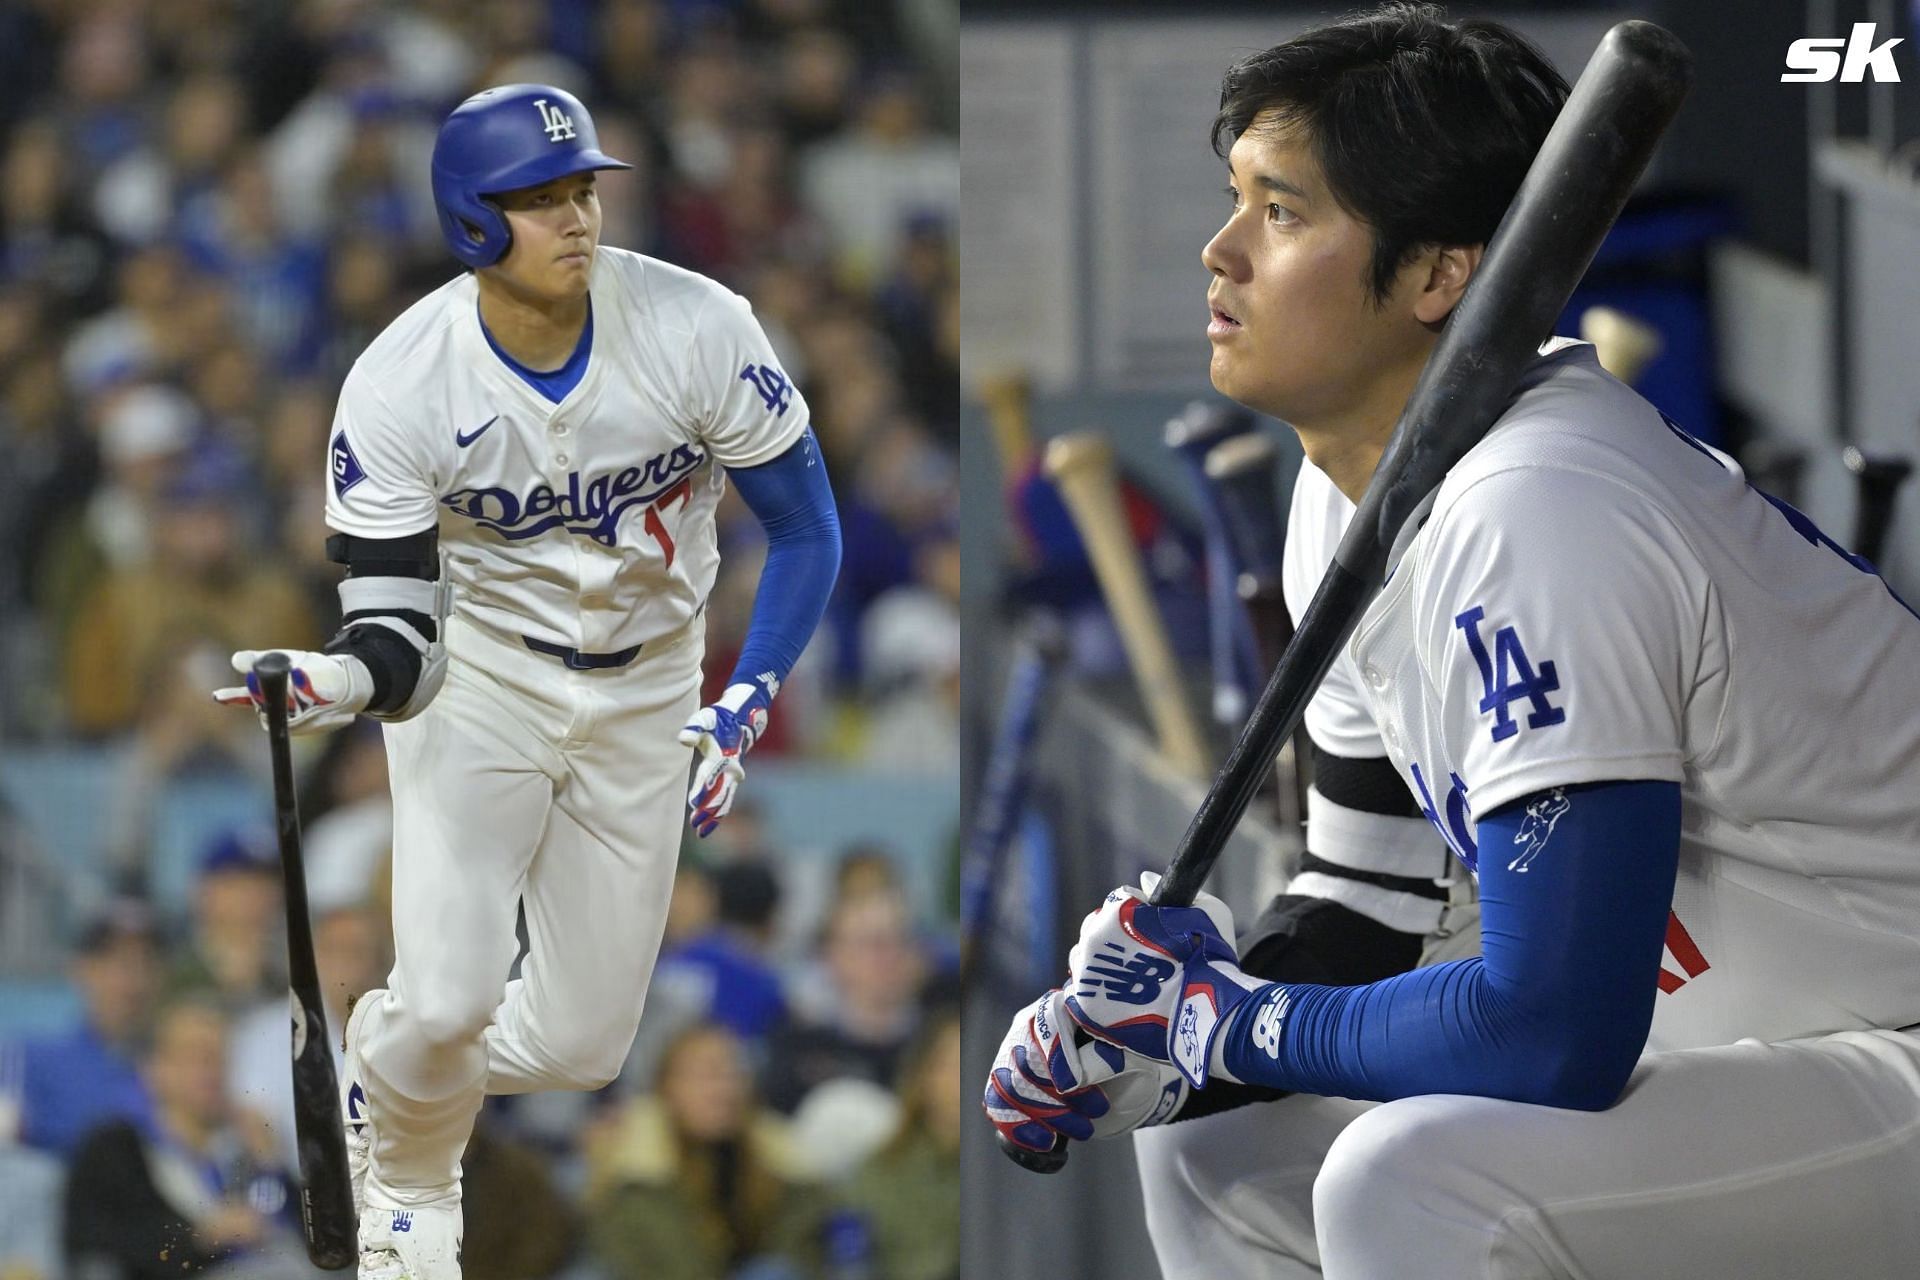 Fans applaud Shohei Ohtani as Dodgers star meets fan who caught his home run ball